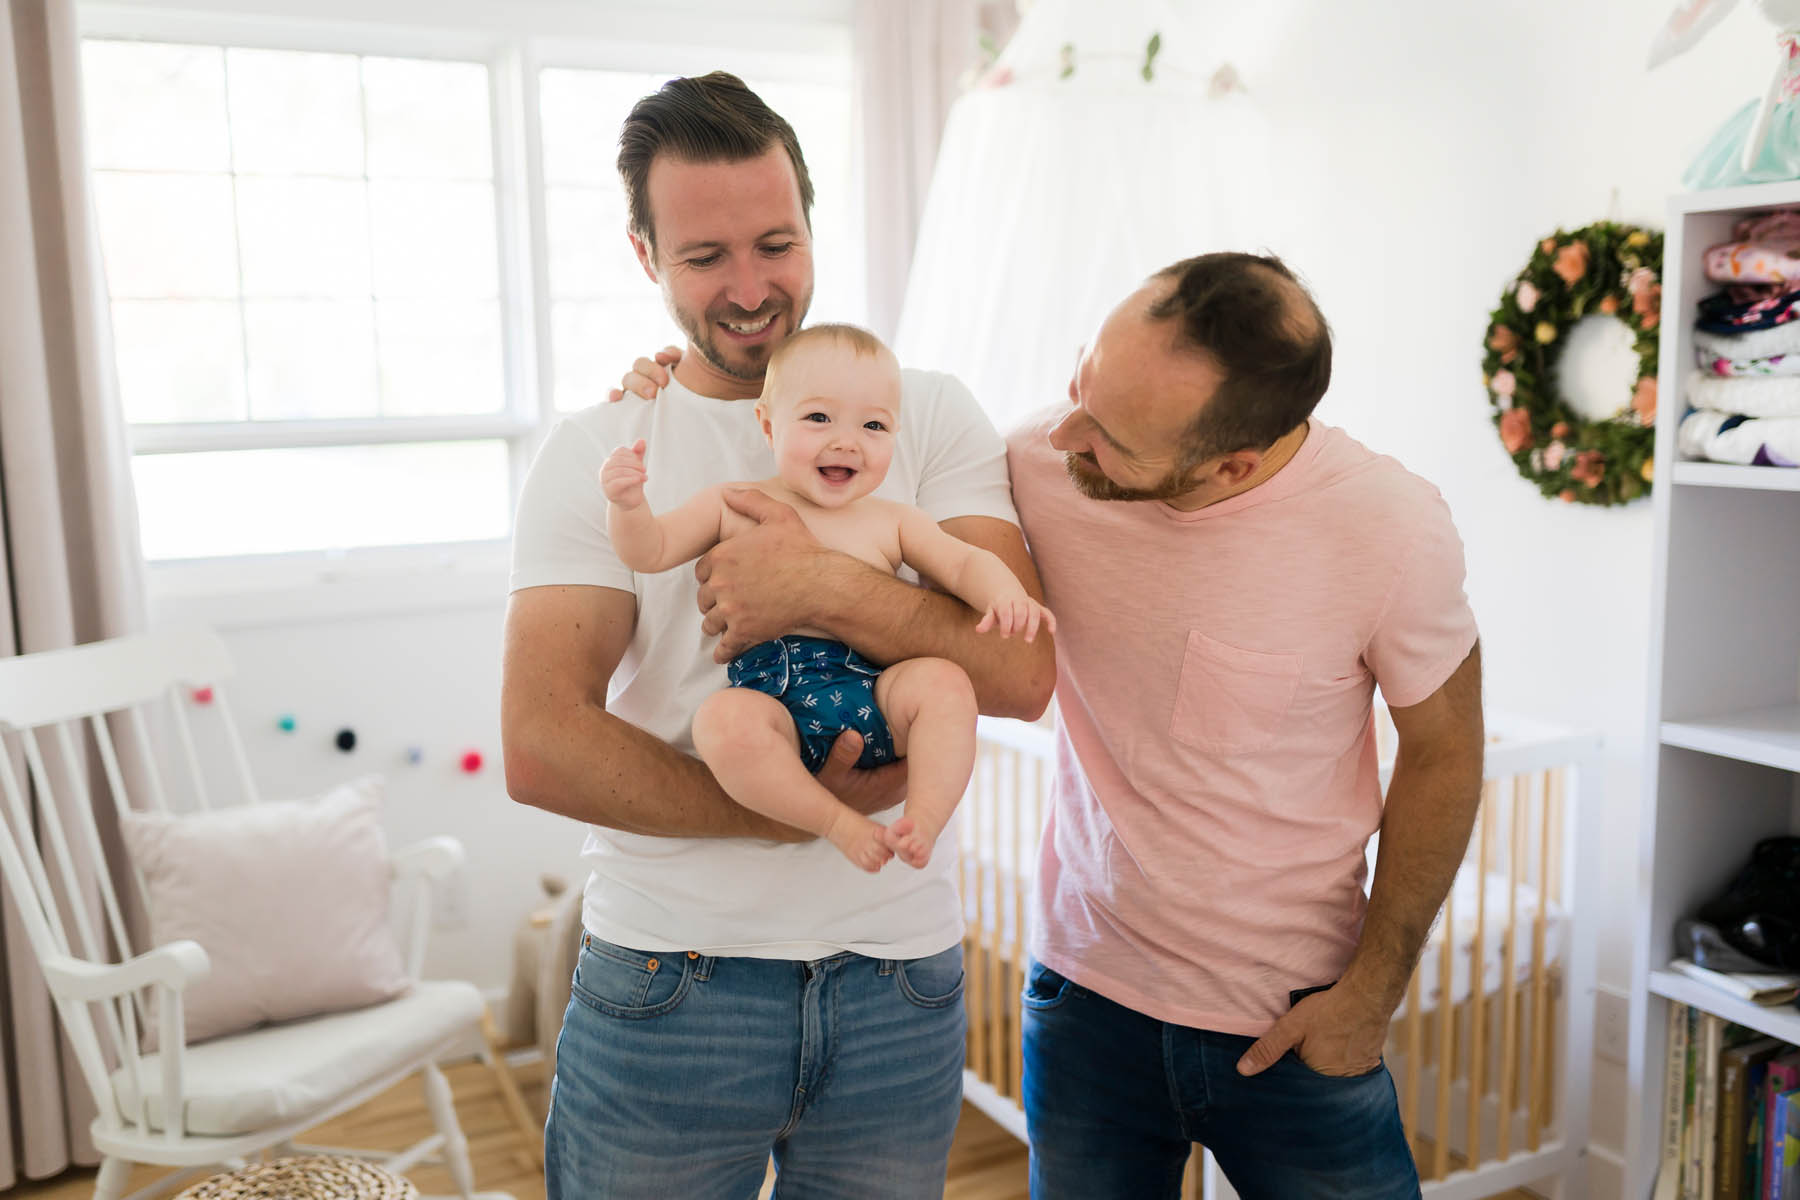 Male gay parents relaxing in baby room holding it